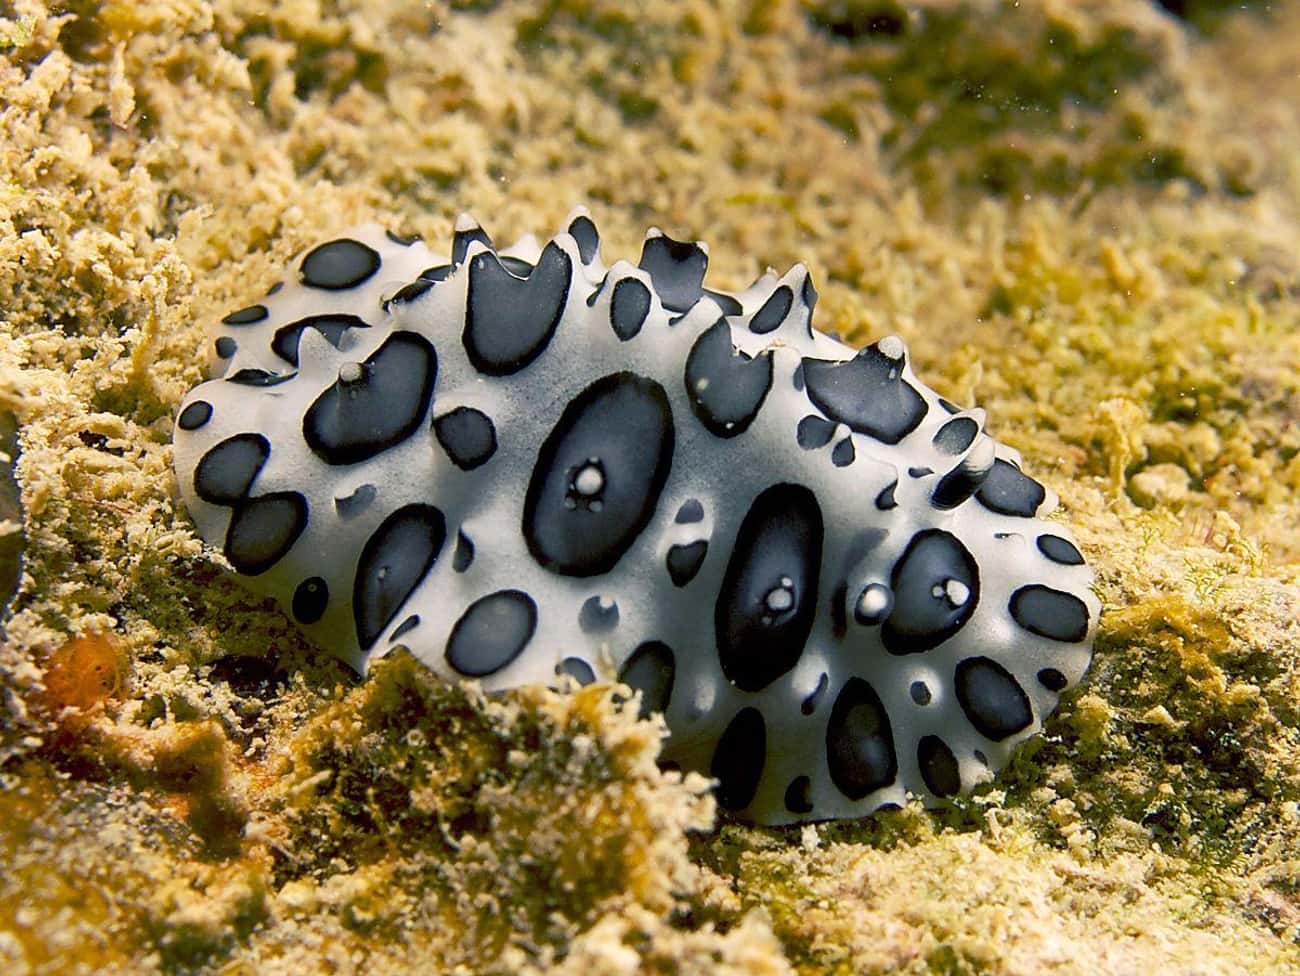 Phyllidiopsis Papilligera - 'Black-Spotted Nudibranch'